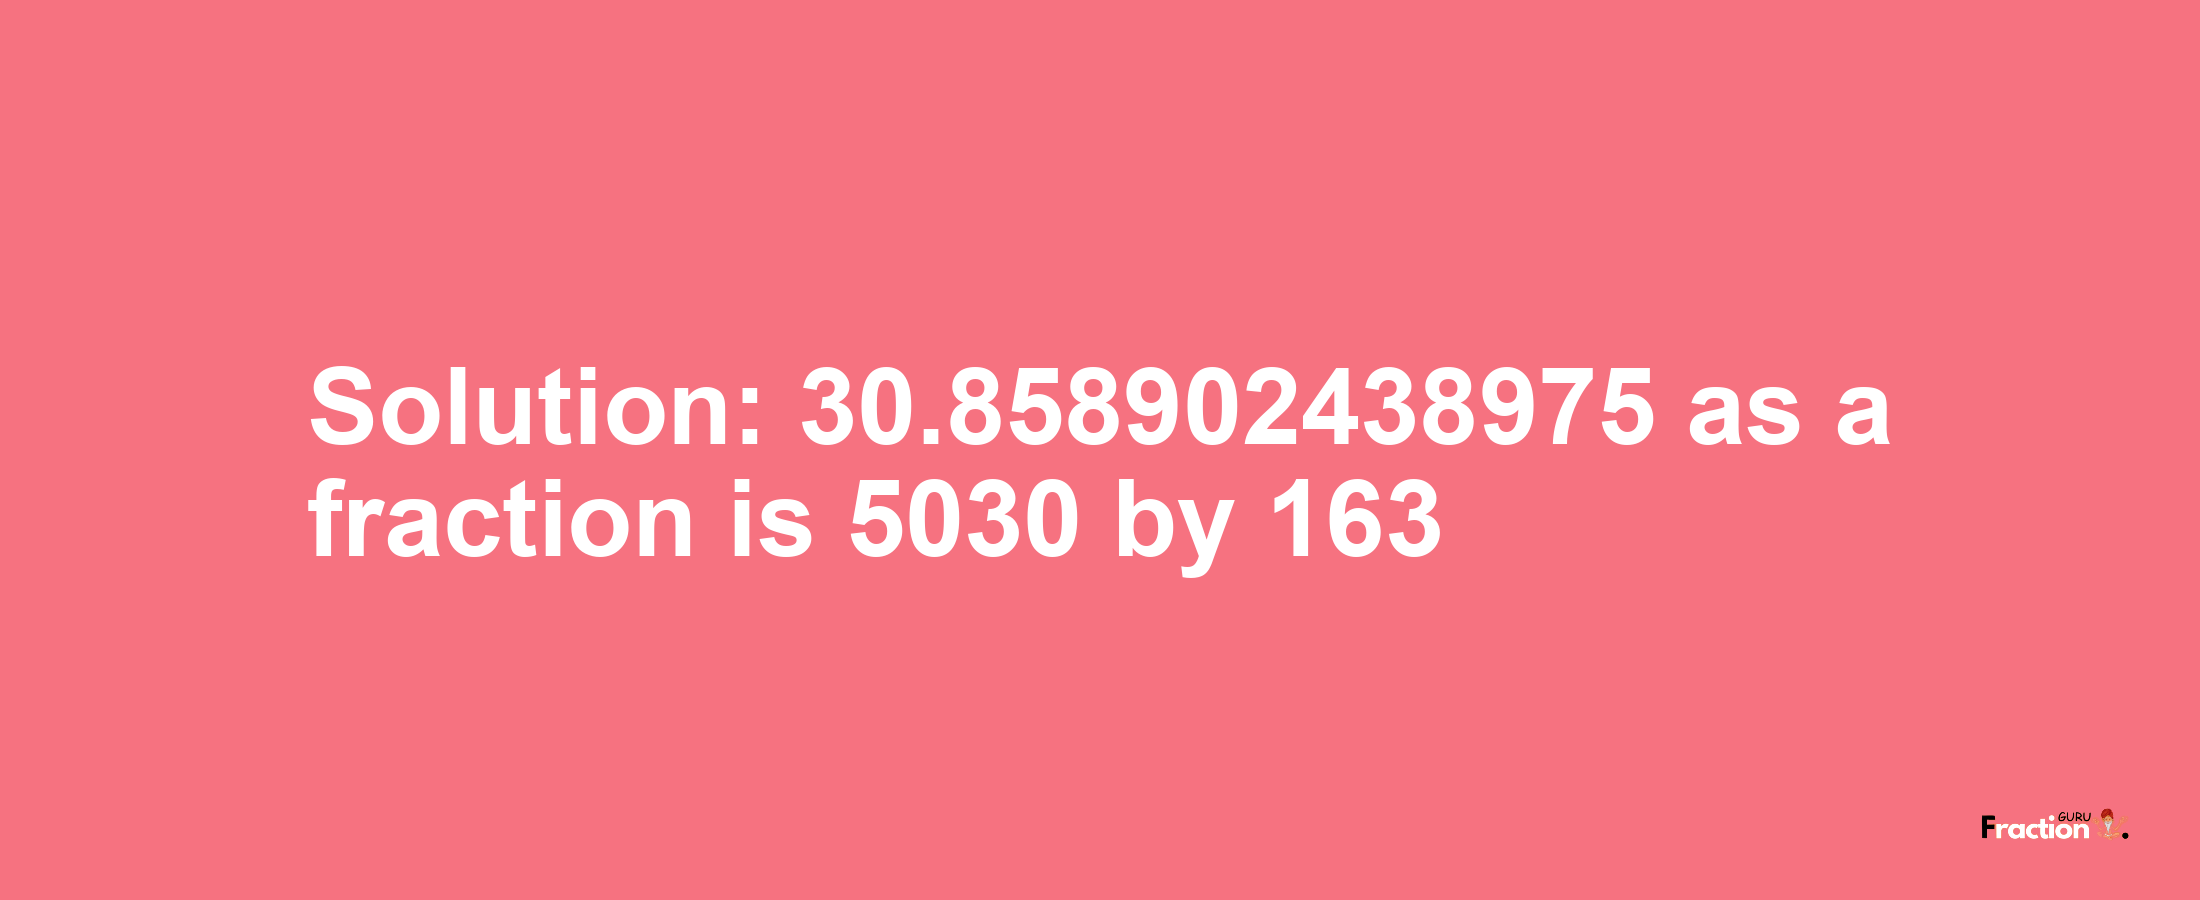 Solution:30.858902438975 as a fraction is 5030/163